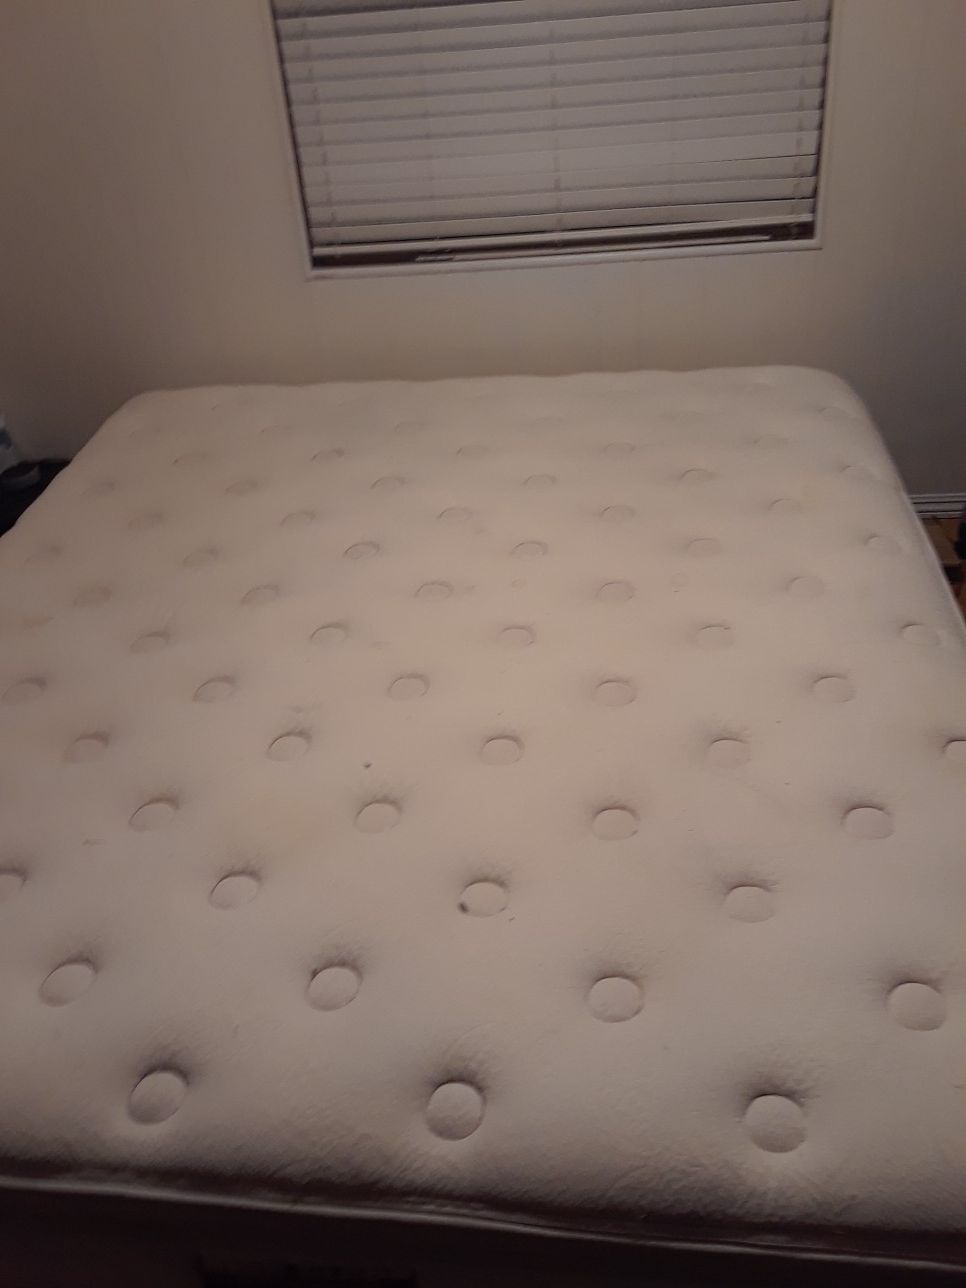 King size mattress and box springs. Free